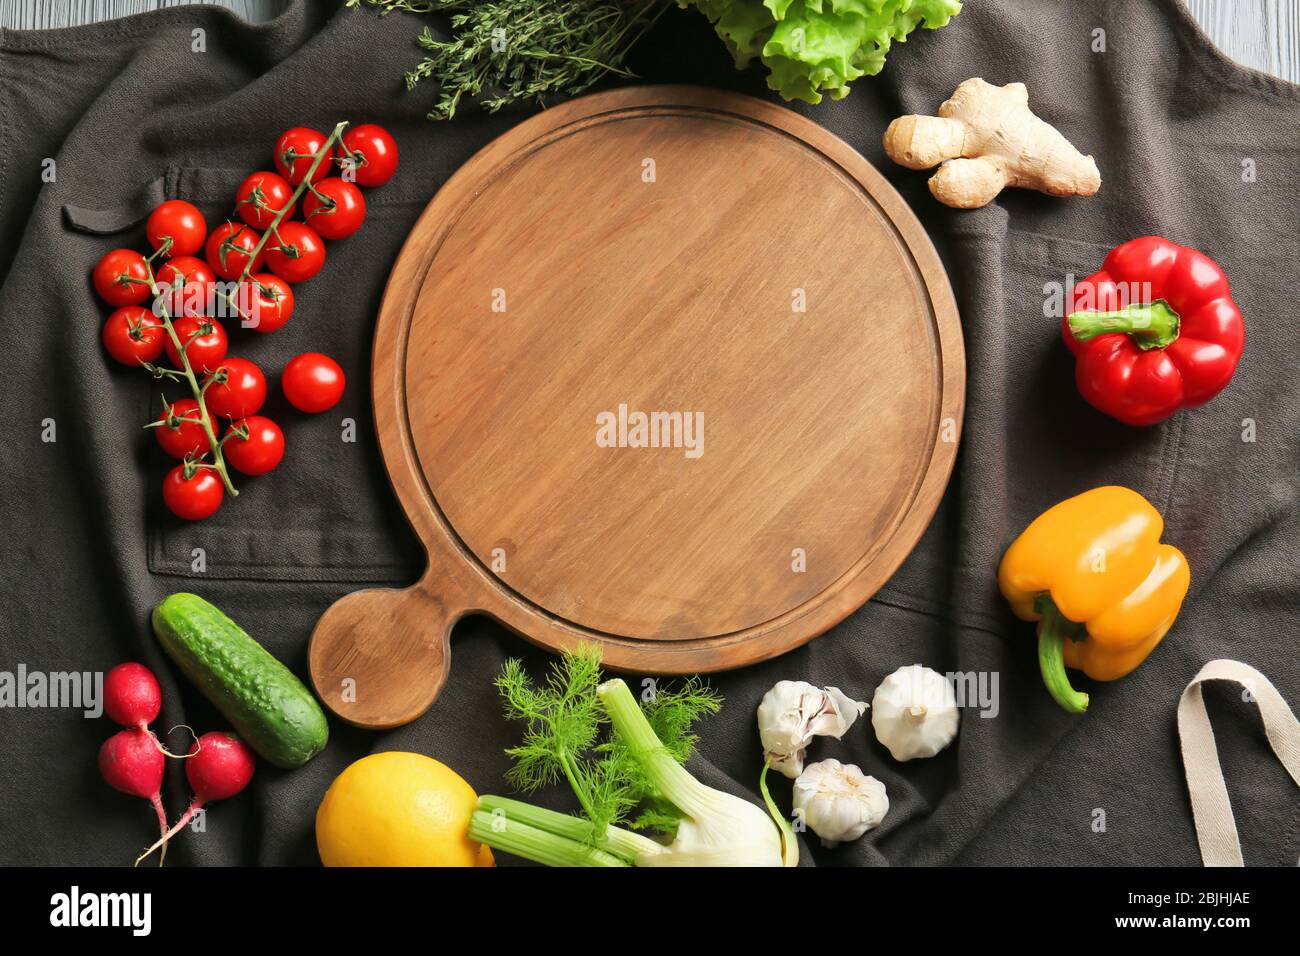 Wooden Board And Vegetables On Kitchen Table Cooking Classes Concept Stock Photo Alamy